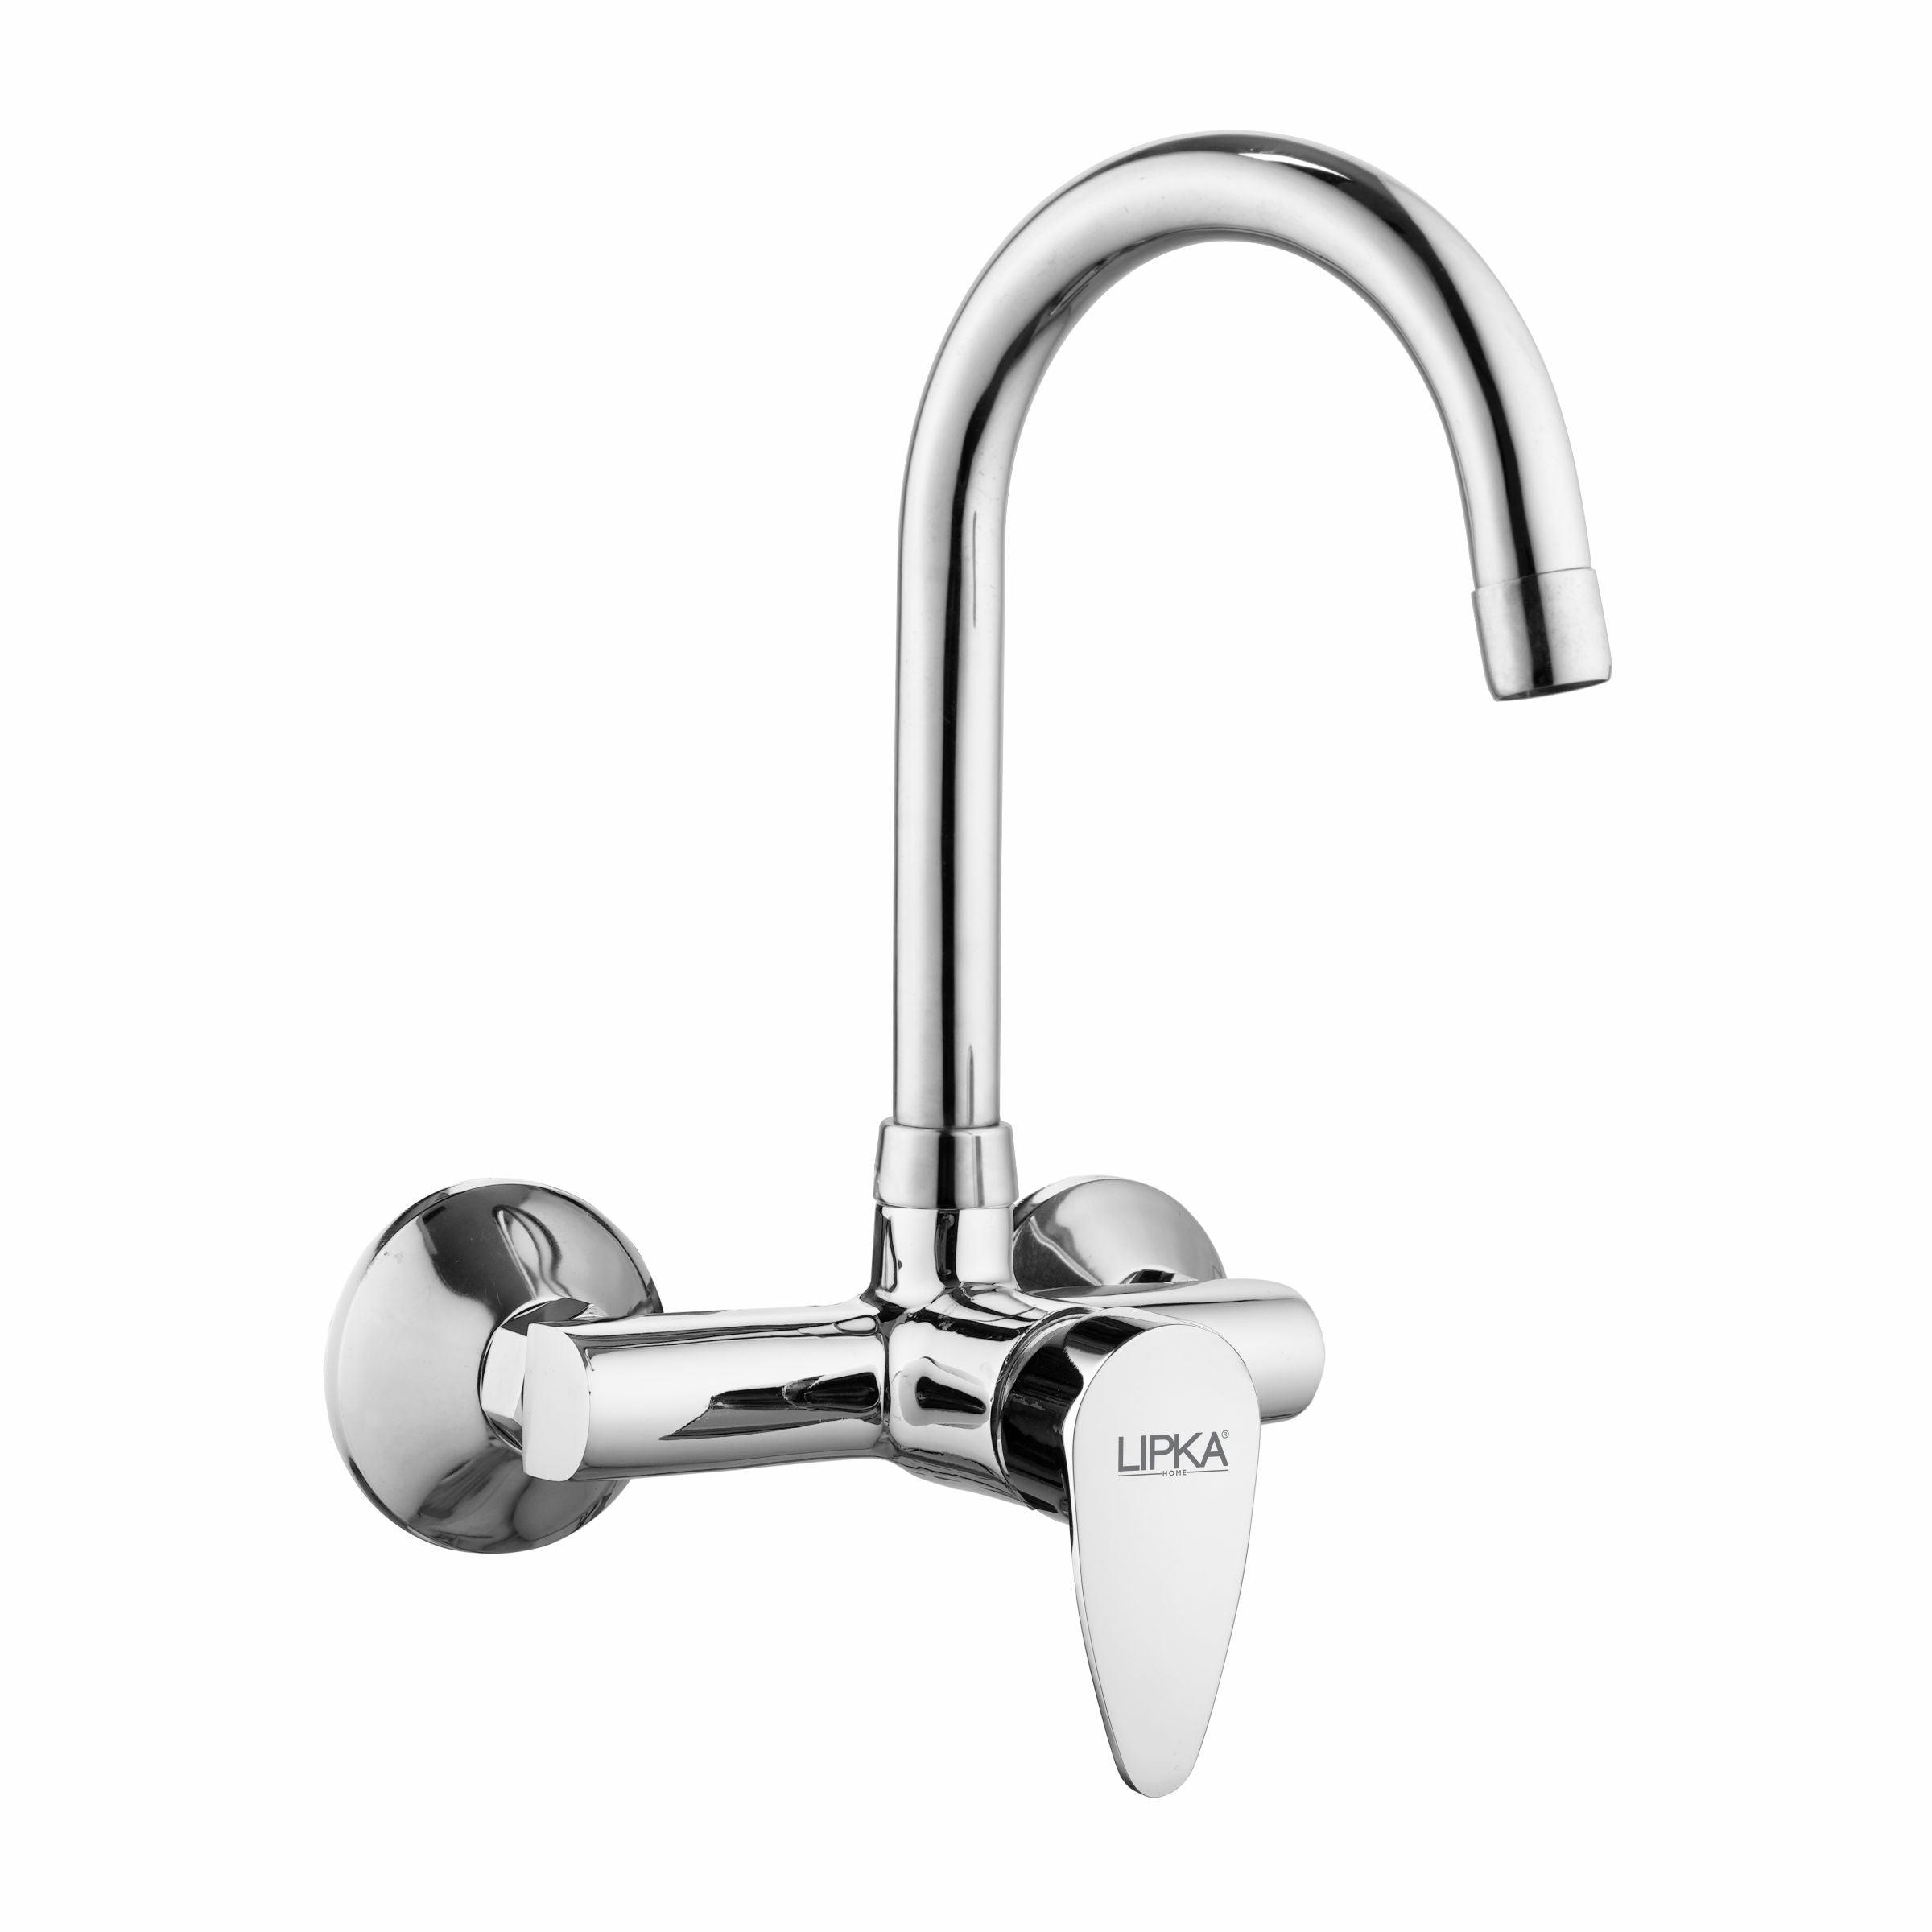 Virgo Single Lever Sink Mixer with Swivel Spout (20 Inches) - LIPKA - Lipka Home